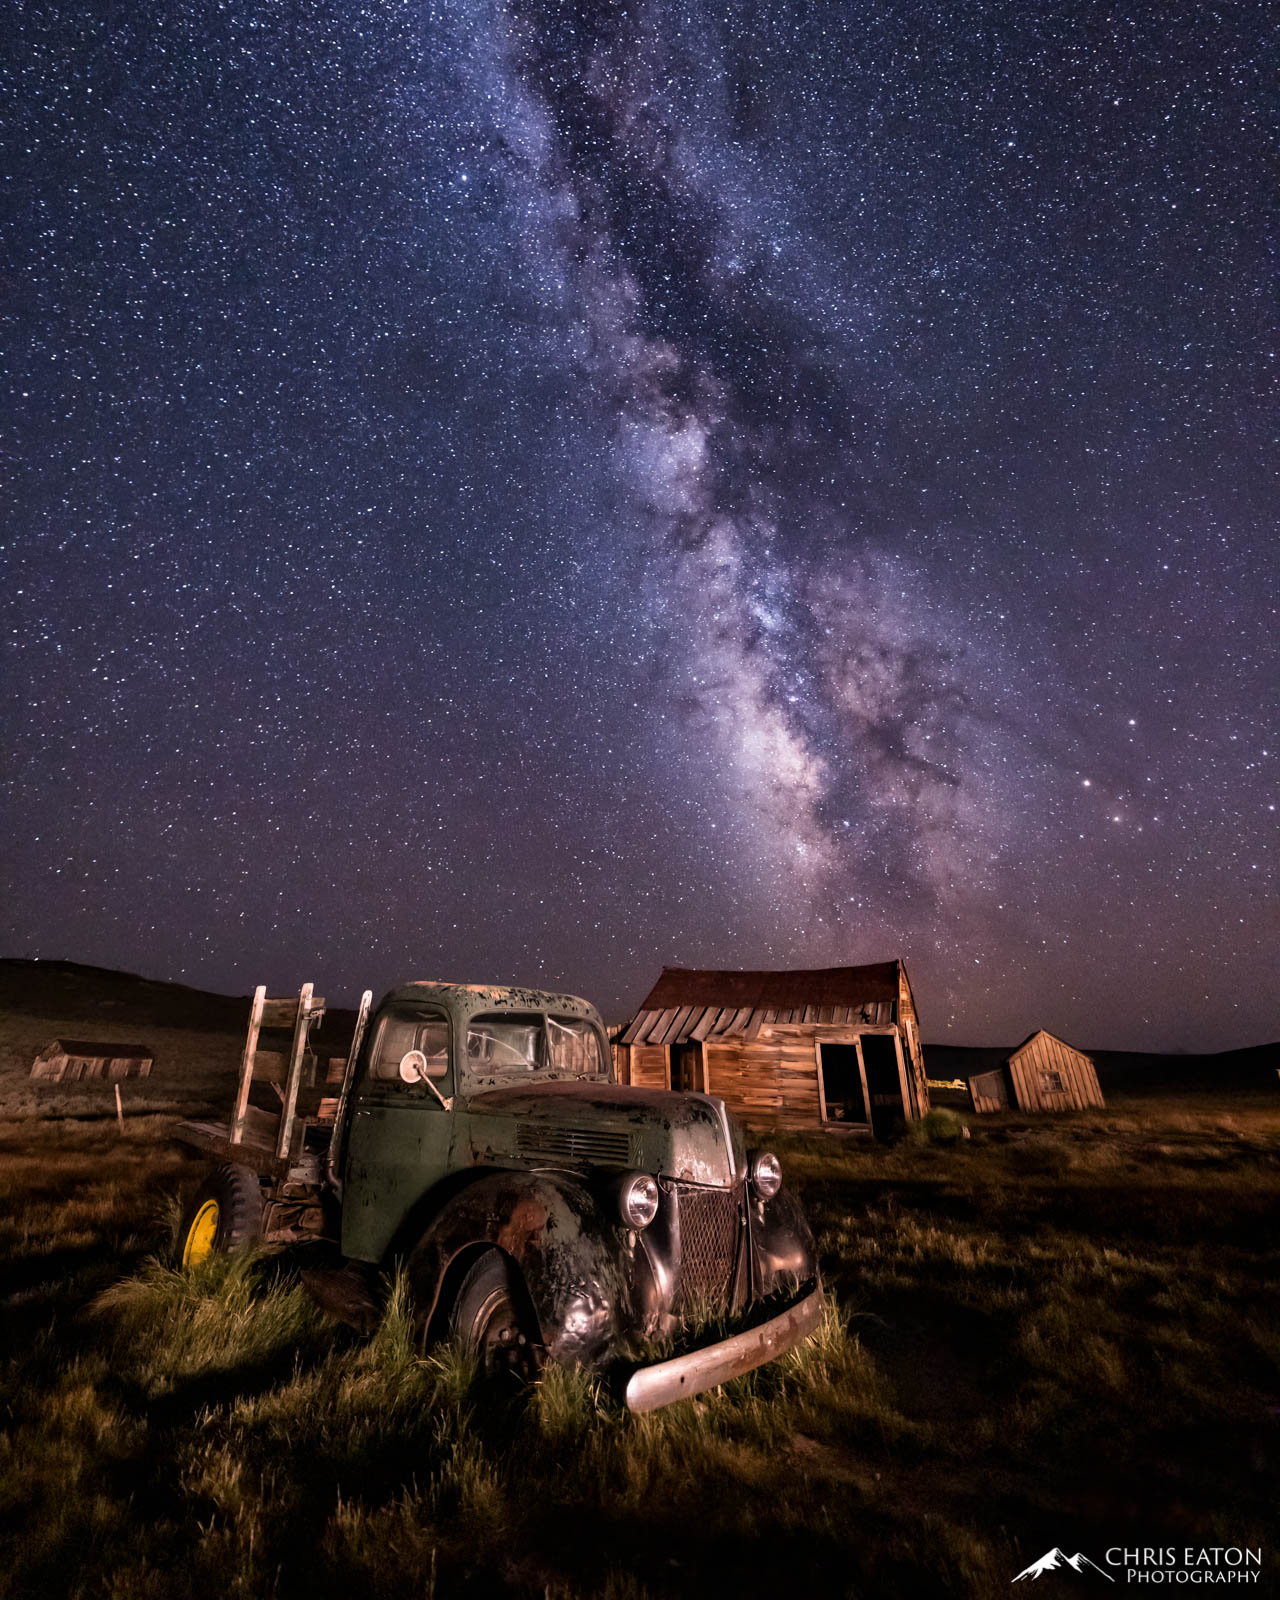 An old mining truck and ghost town with the Milky Way galaxy.